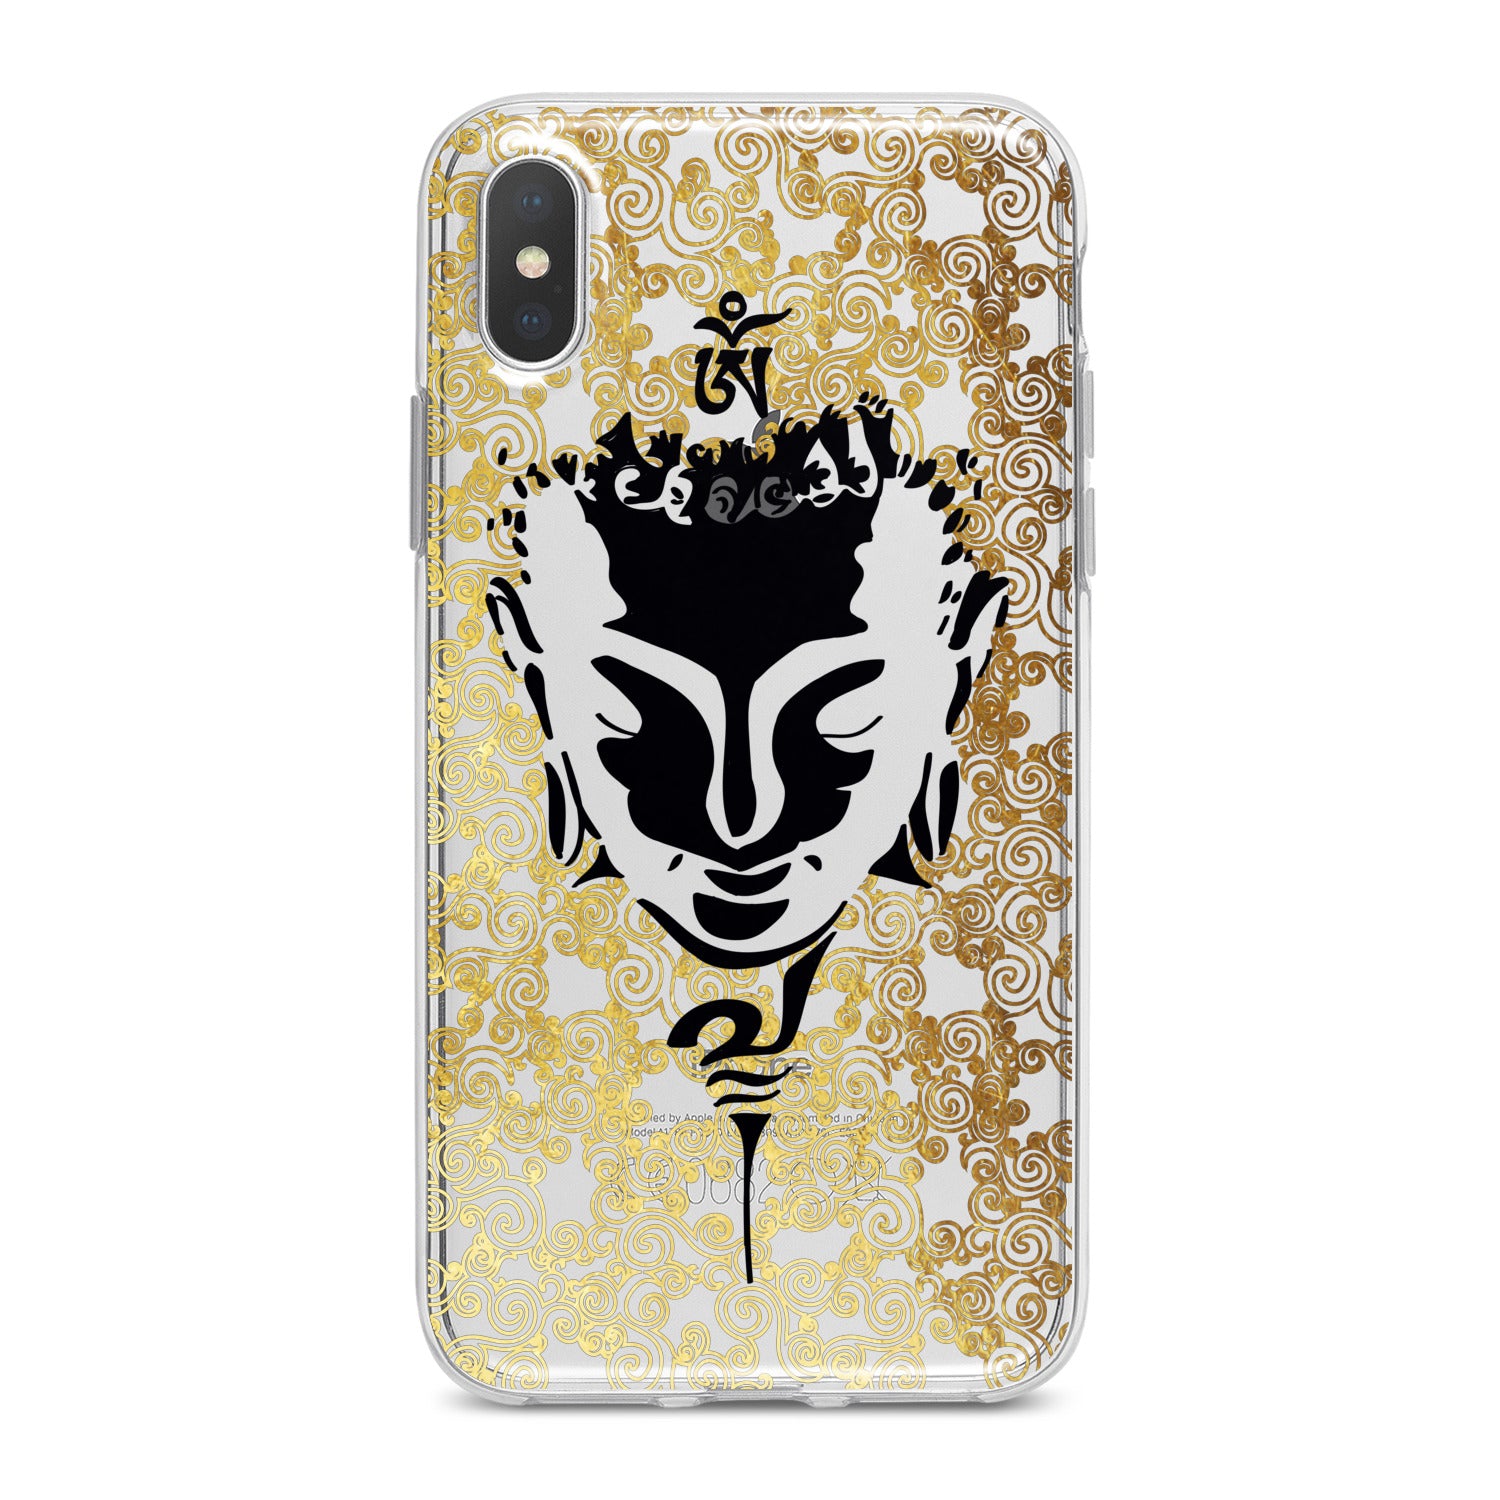 Lex Altern Buddha Face Phone Case for your iPhone & Android phone.